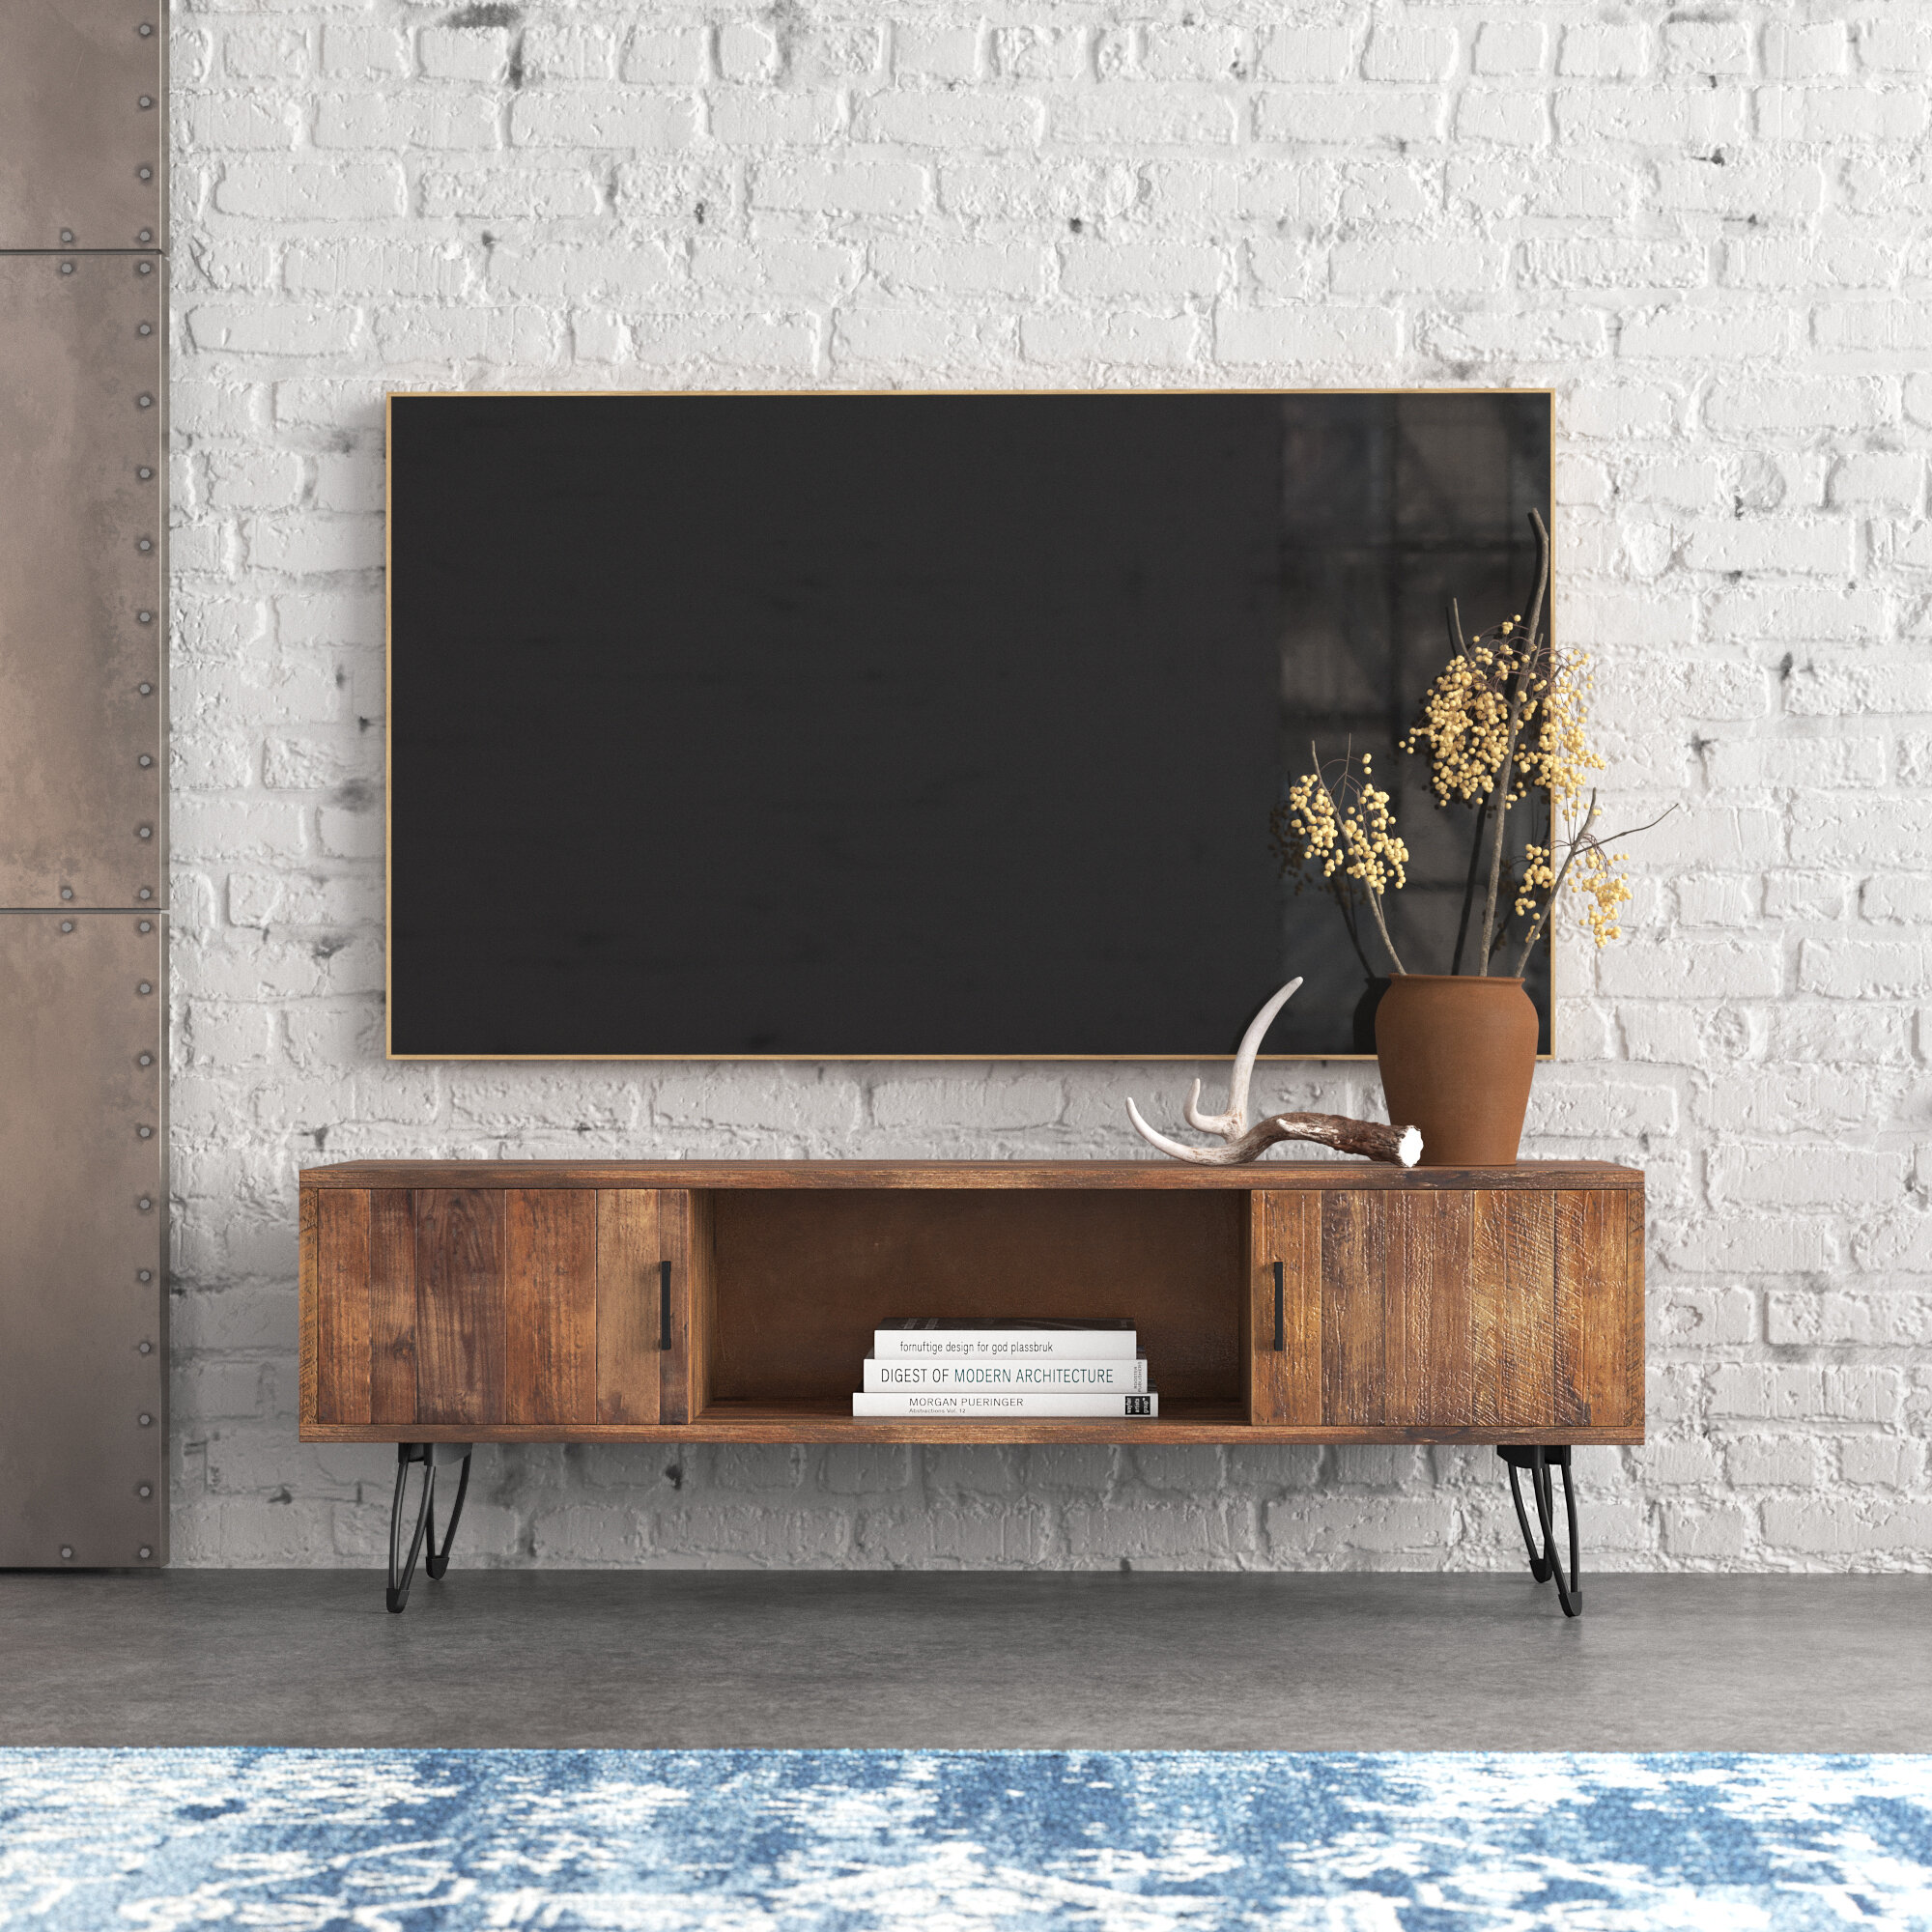 Slim Low Rise Painted Wood Effect TV Stand for TV sizes 32" 70" 